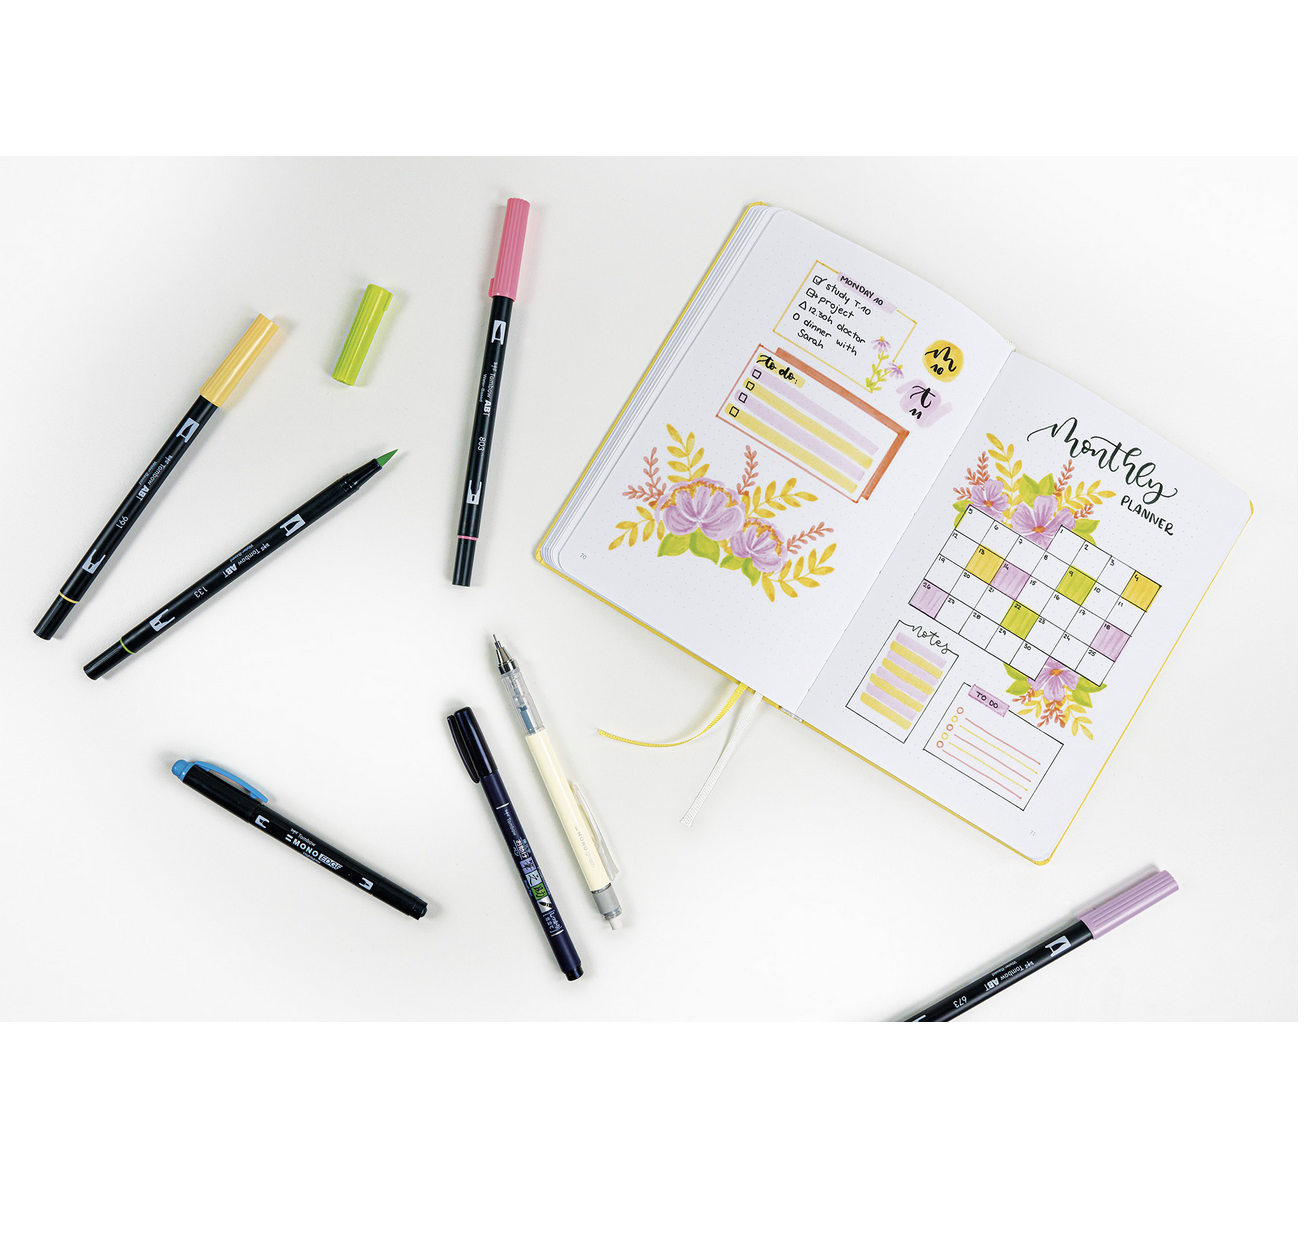 https://www.haveamooch.co.uk/wp-content/uploads/2021/04/Screenshot_2021-04-27-Tombow-Creative-Bullet-Journaling-Set-in-Bright-Colours-Tombow2.png